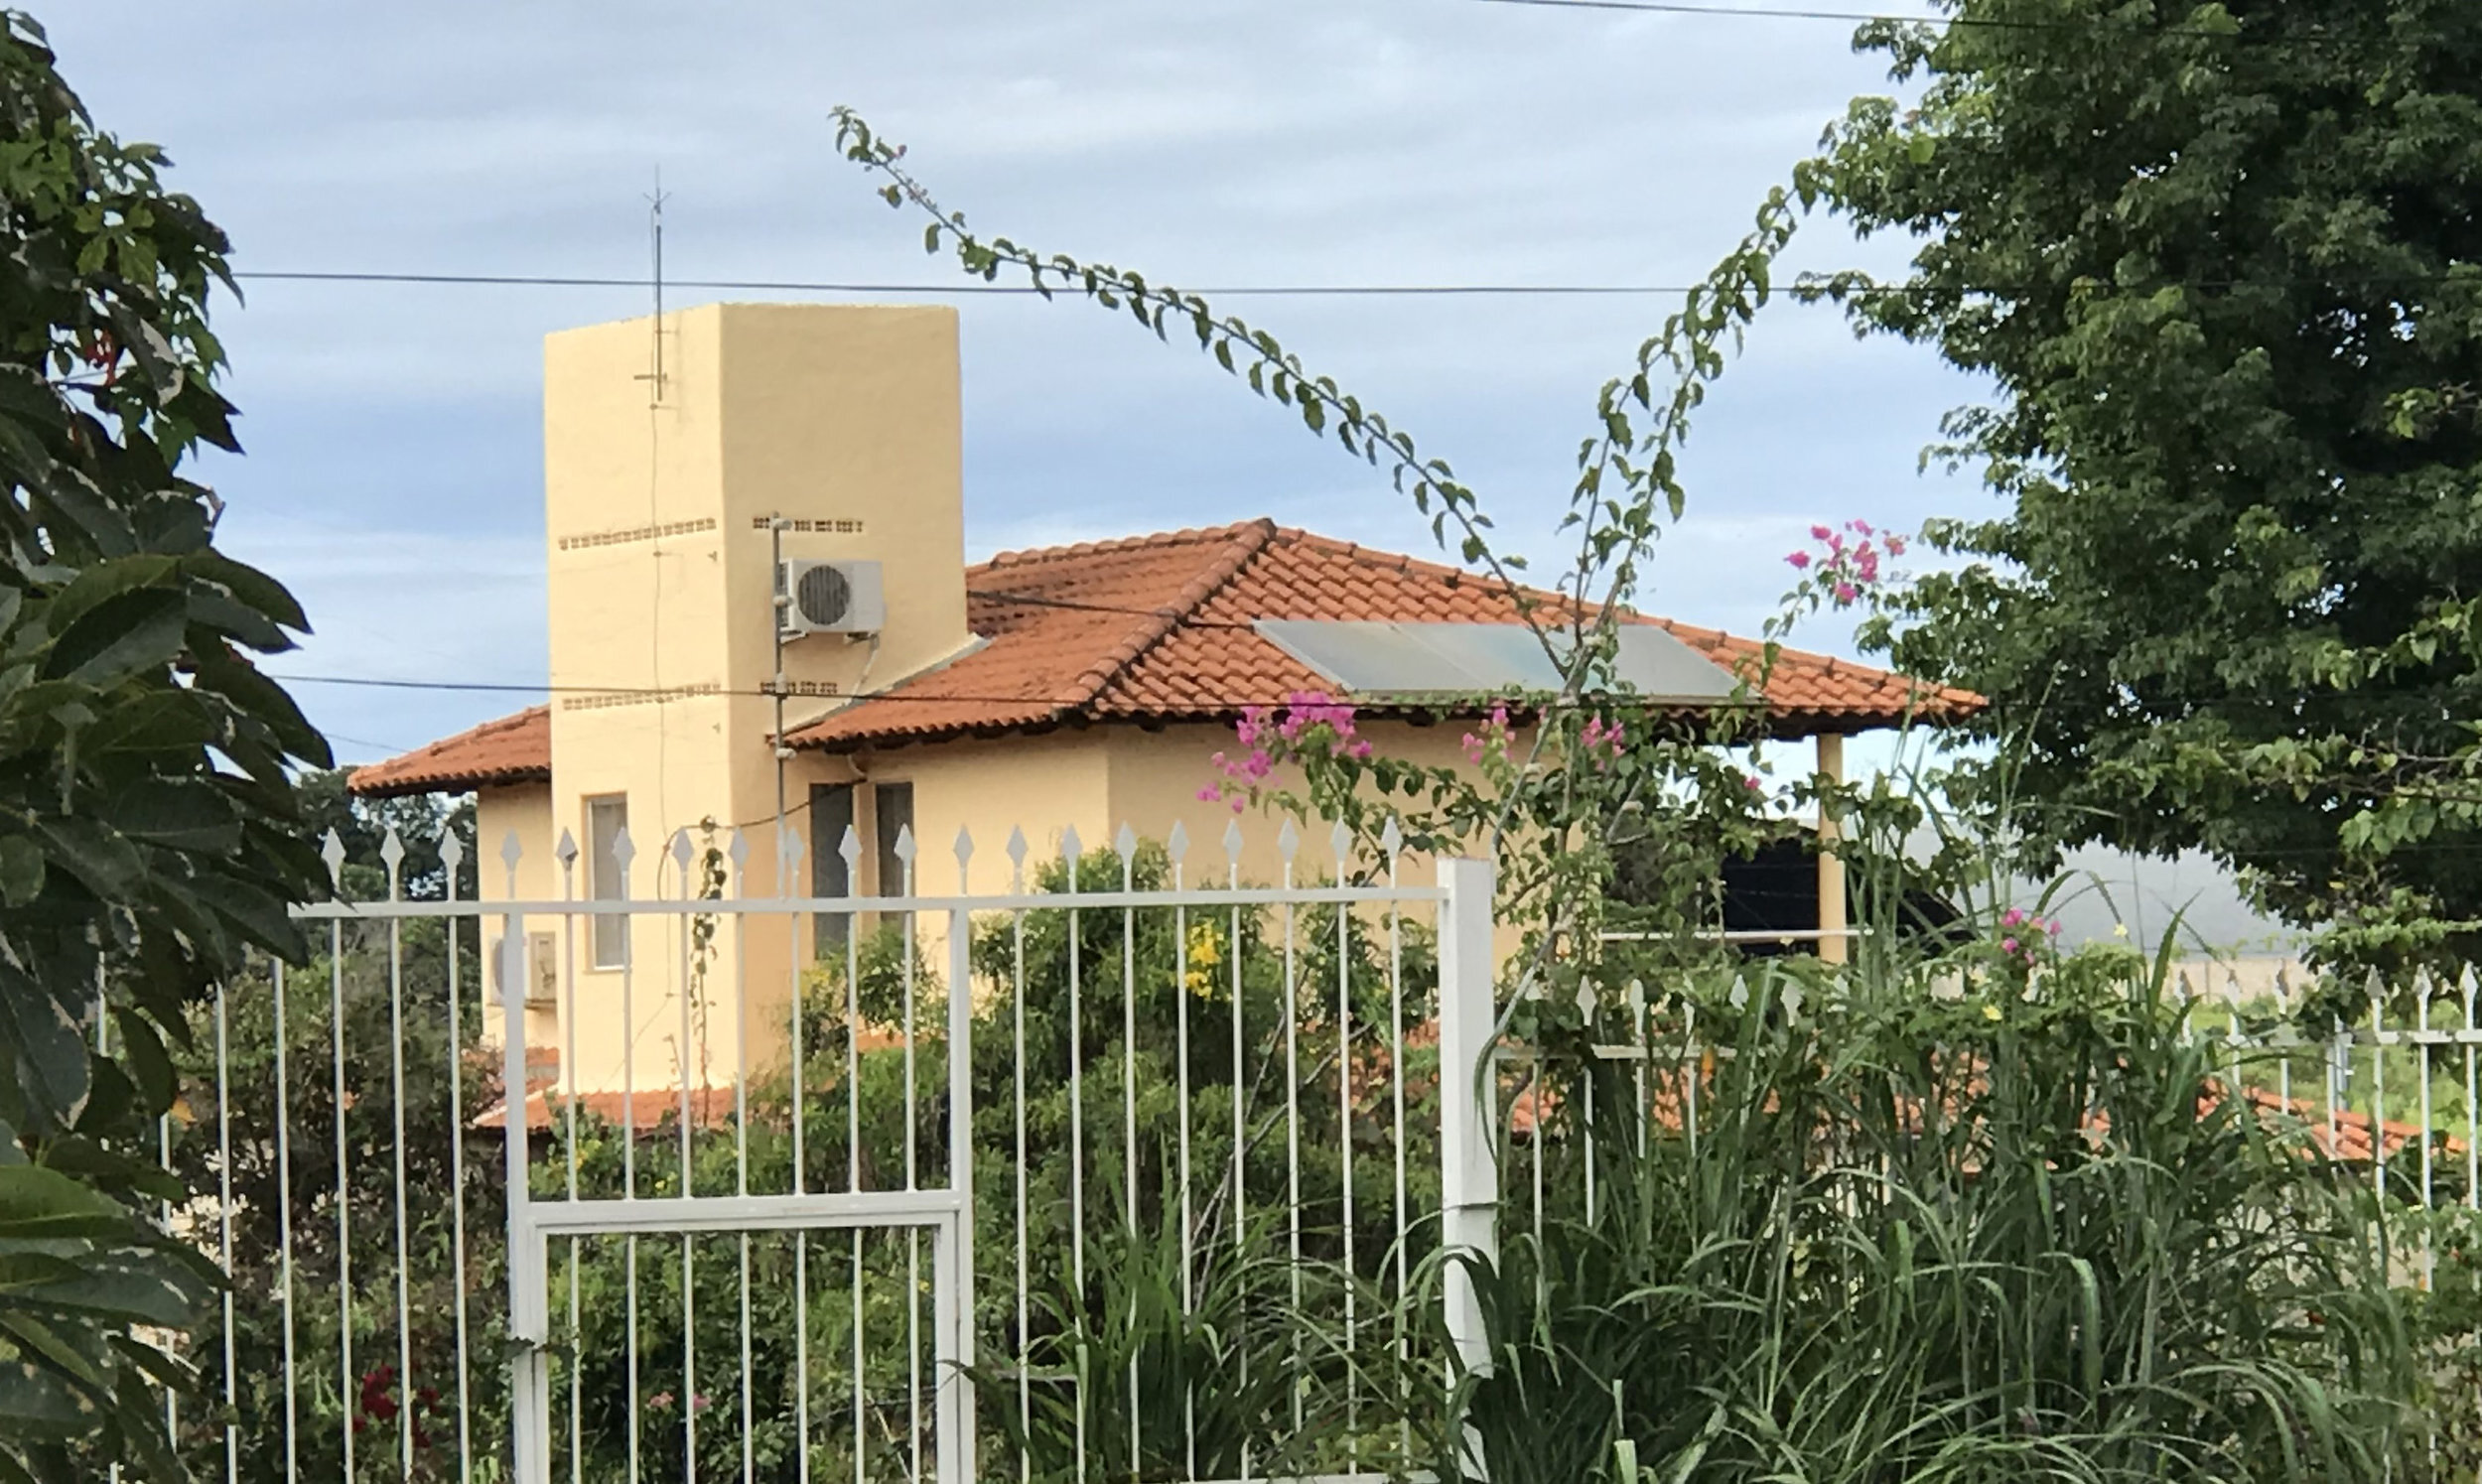 Casa de Luz - viewed from the neighboring property behind